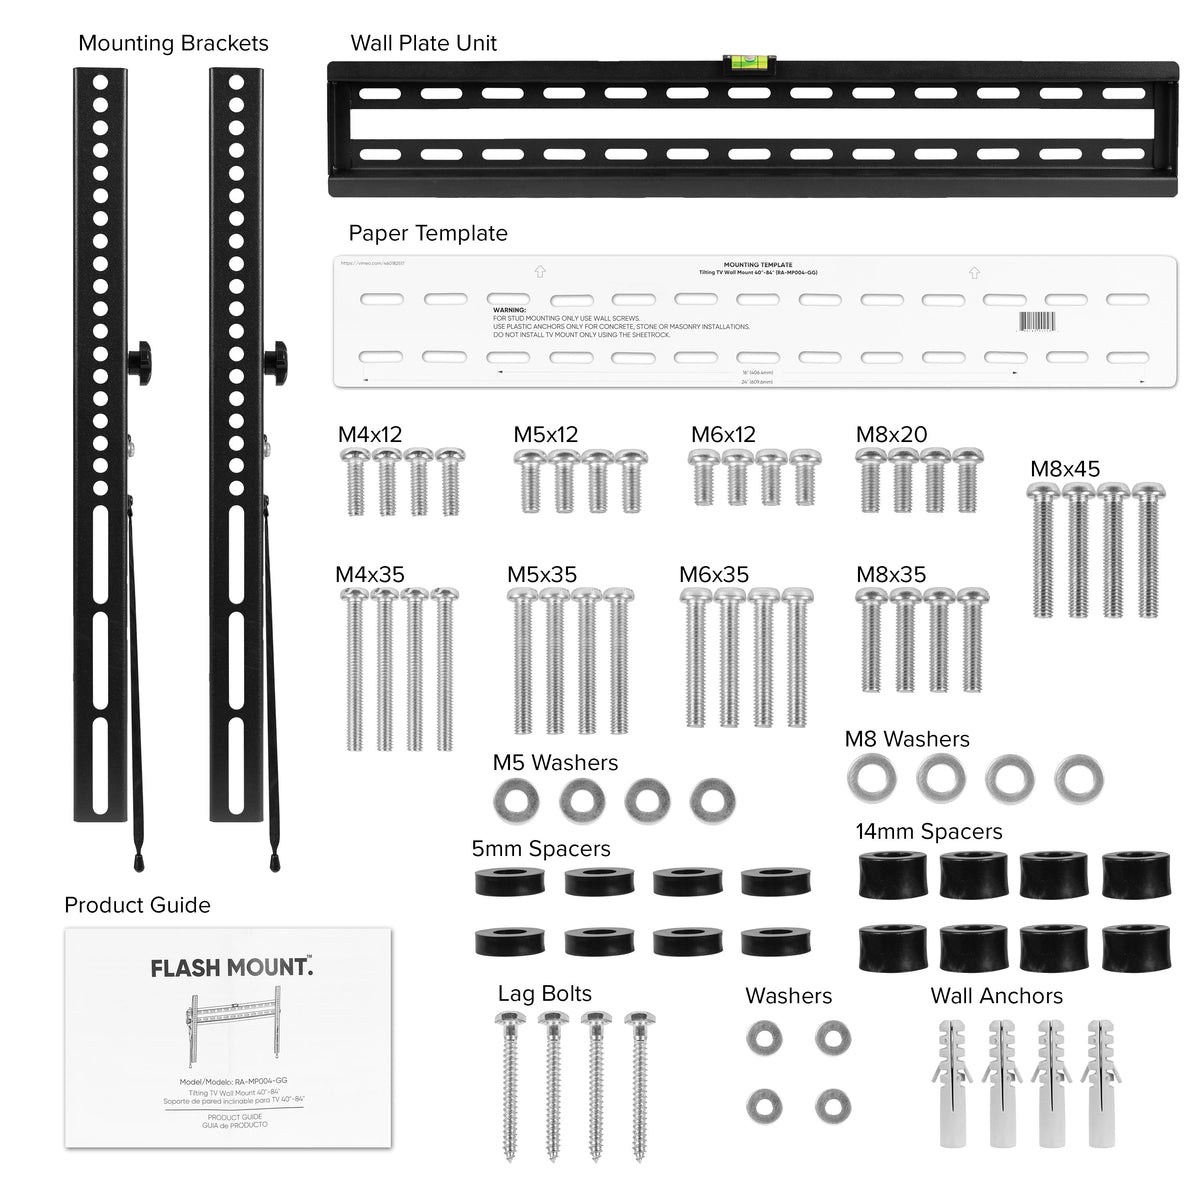 40"-84" TV |#| 40"-84" Tilt TV Wall Mount-Built-In Level-Weight Capacity Up to 140 lbs.